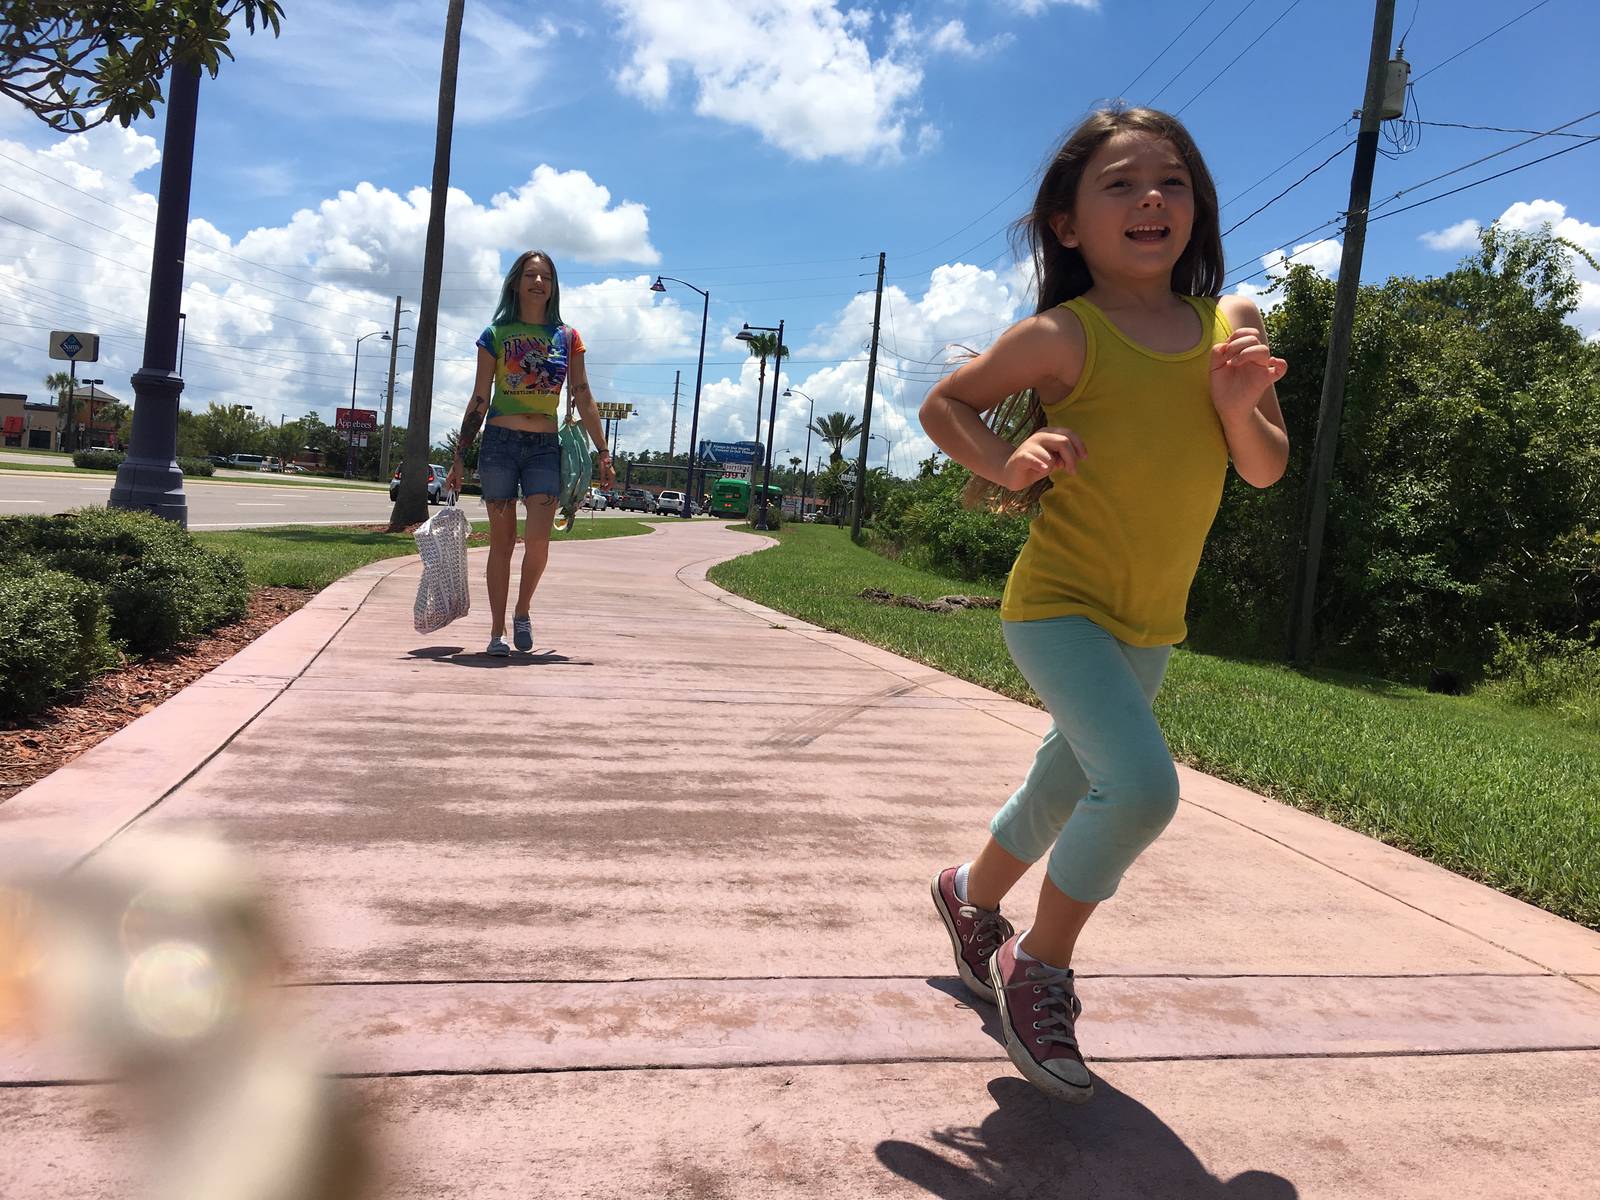 Film The Florida Project (2017)